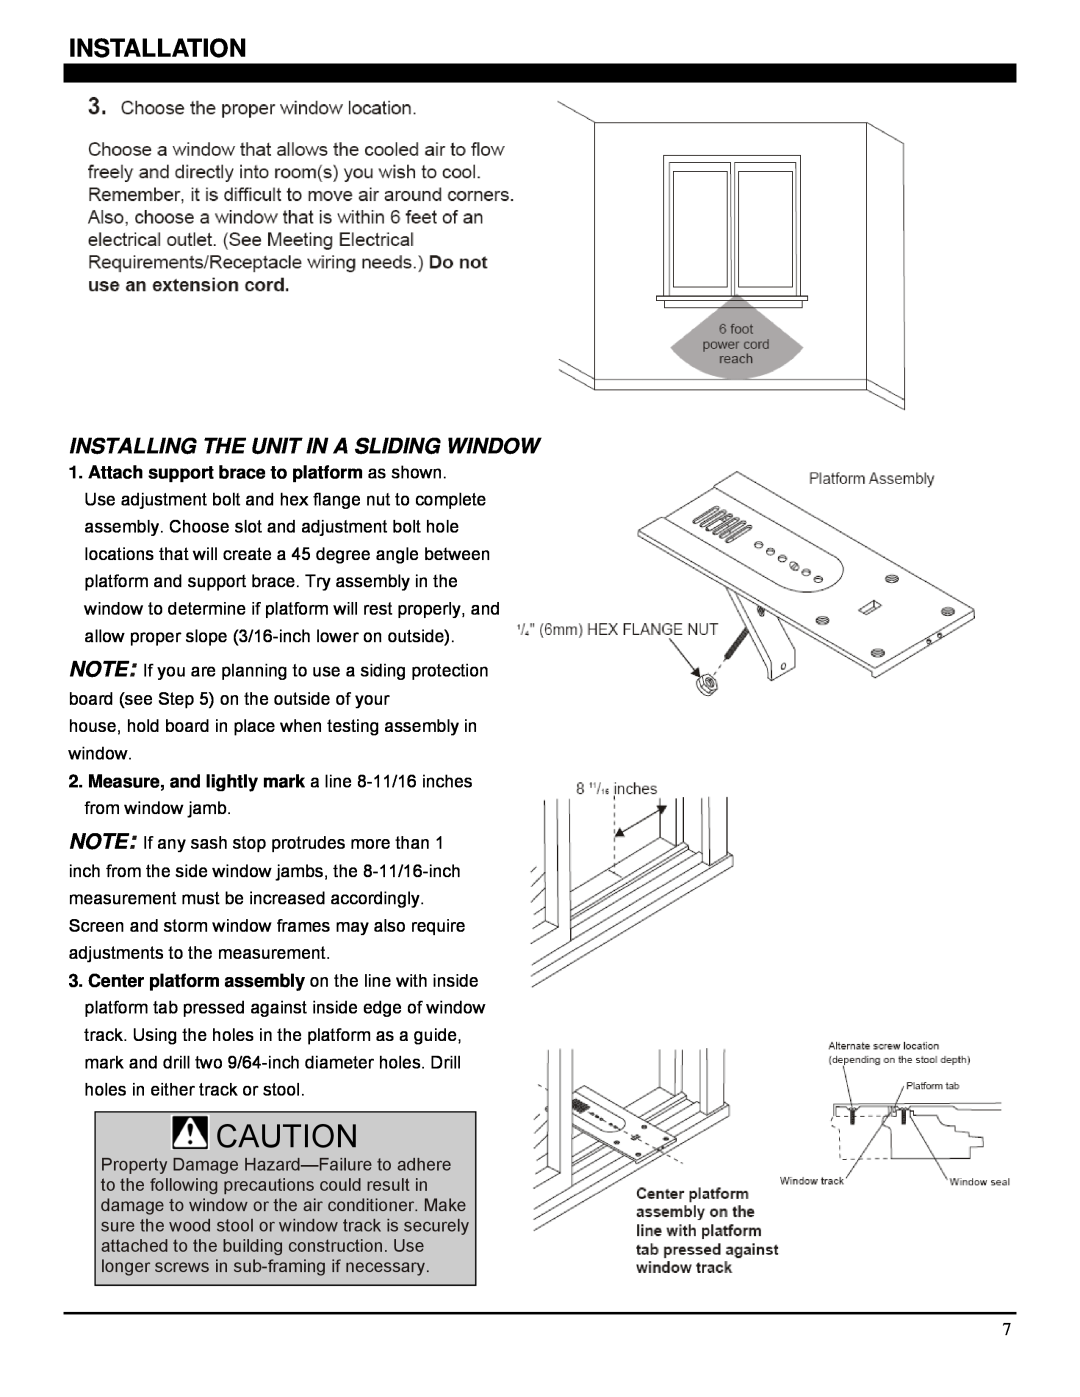 Soleus Air GM-CAC-08ESE, GM-CAC-10SE, GM-CAC-12SE manual Installation, Installing The Unit In A Sliding Window 